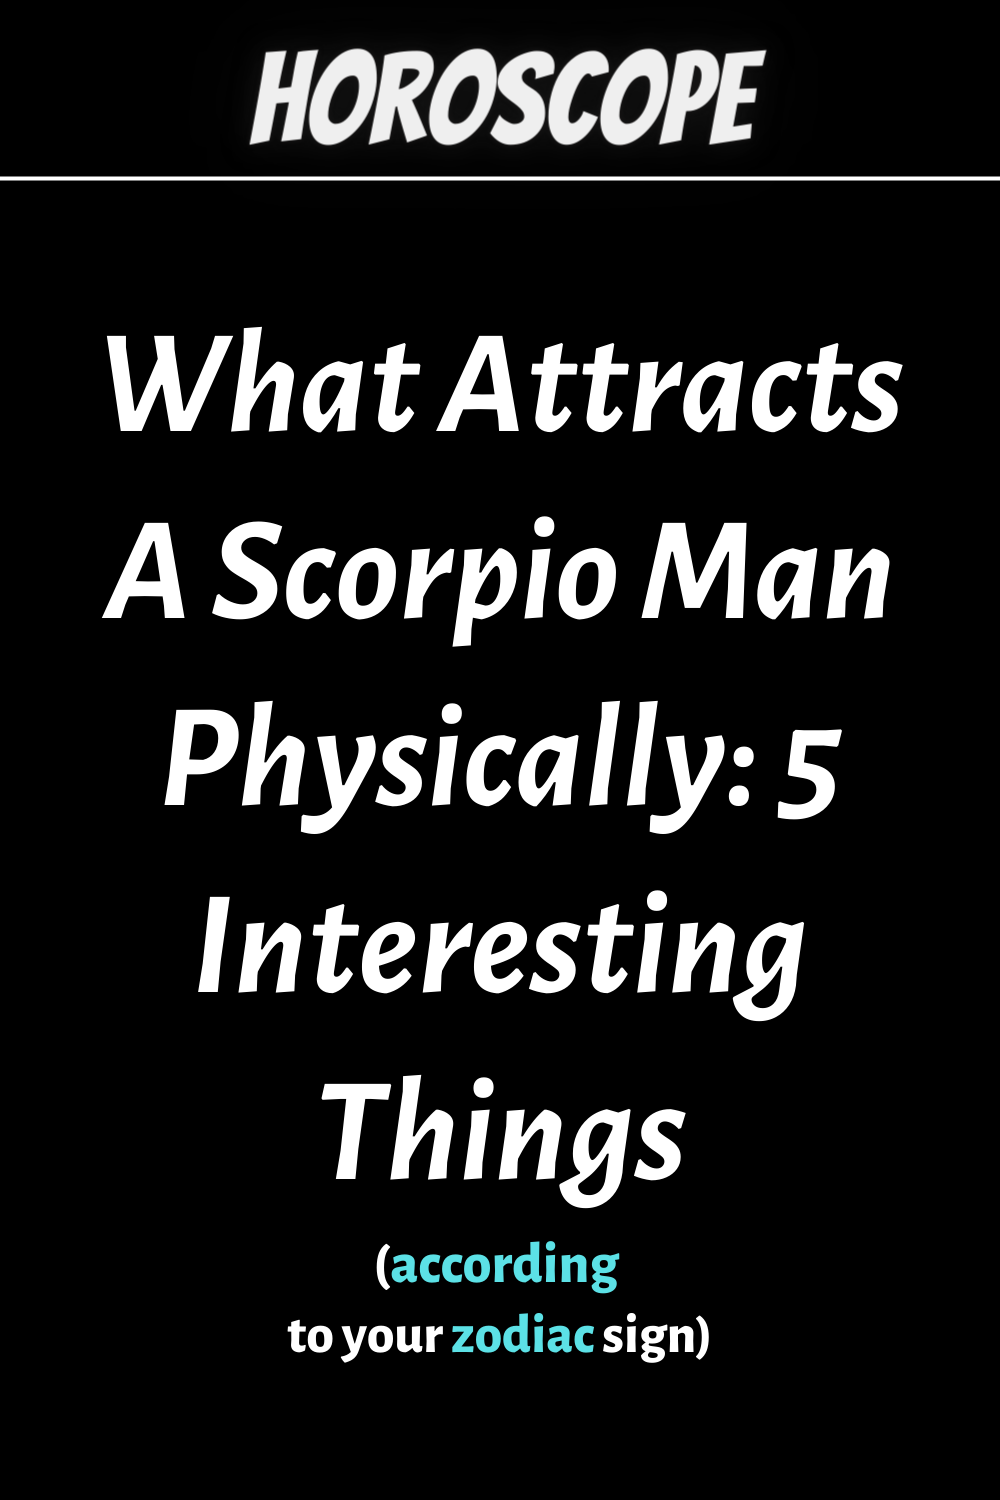 What Attracts A Scorpio Man Physically: 5 Interesting Things